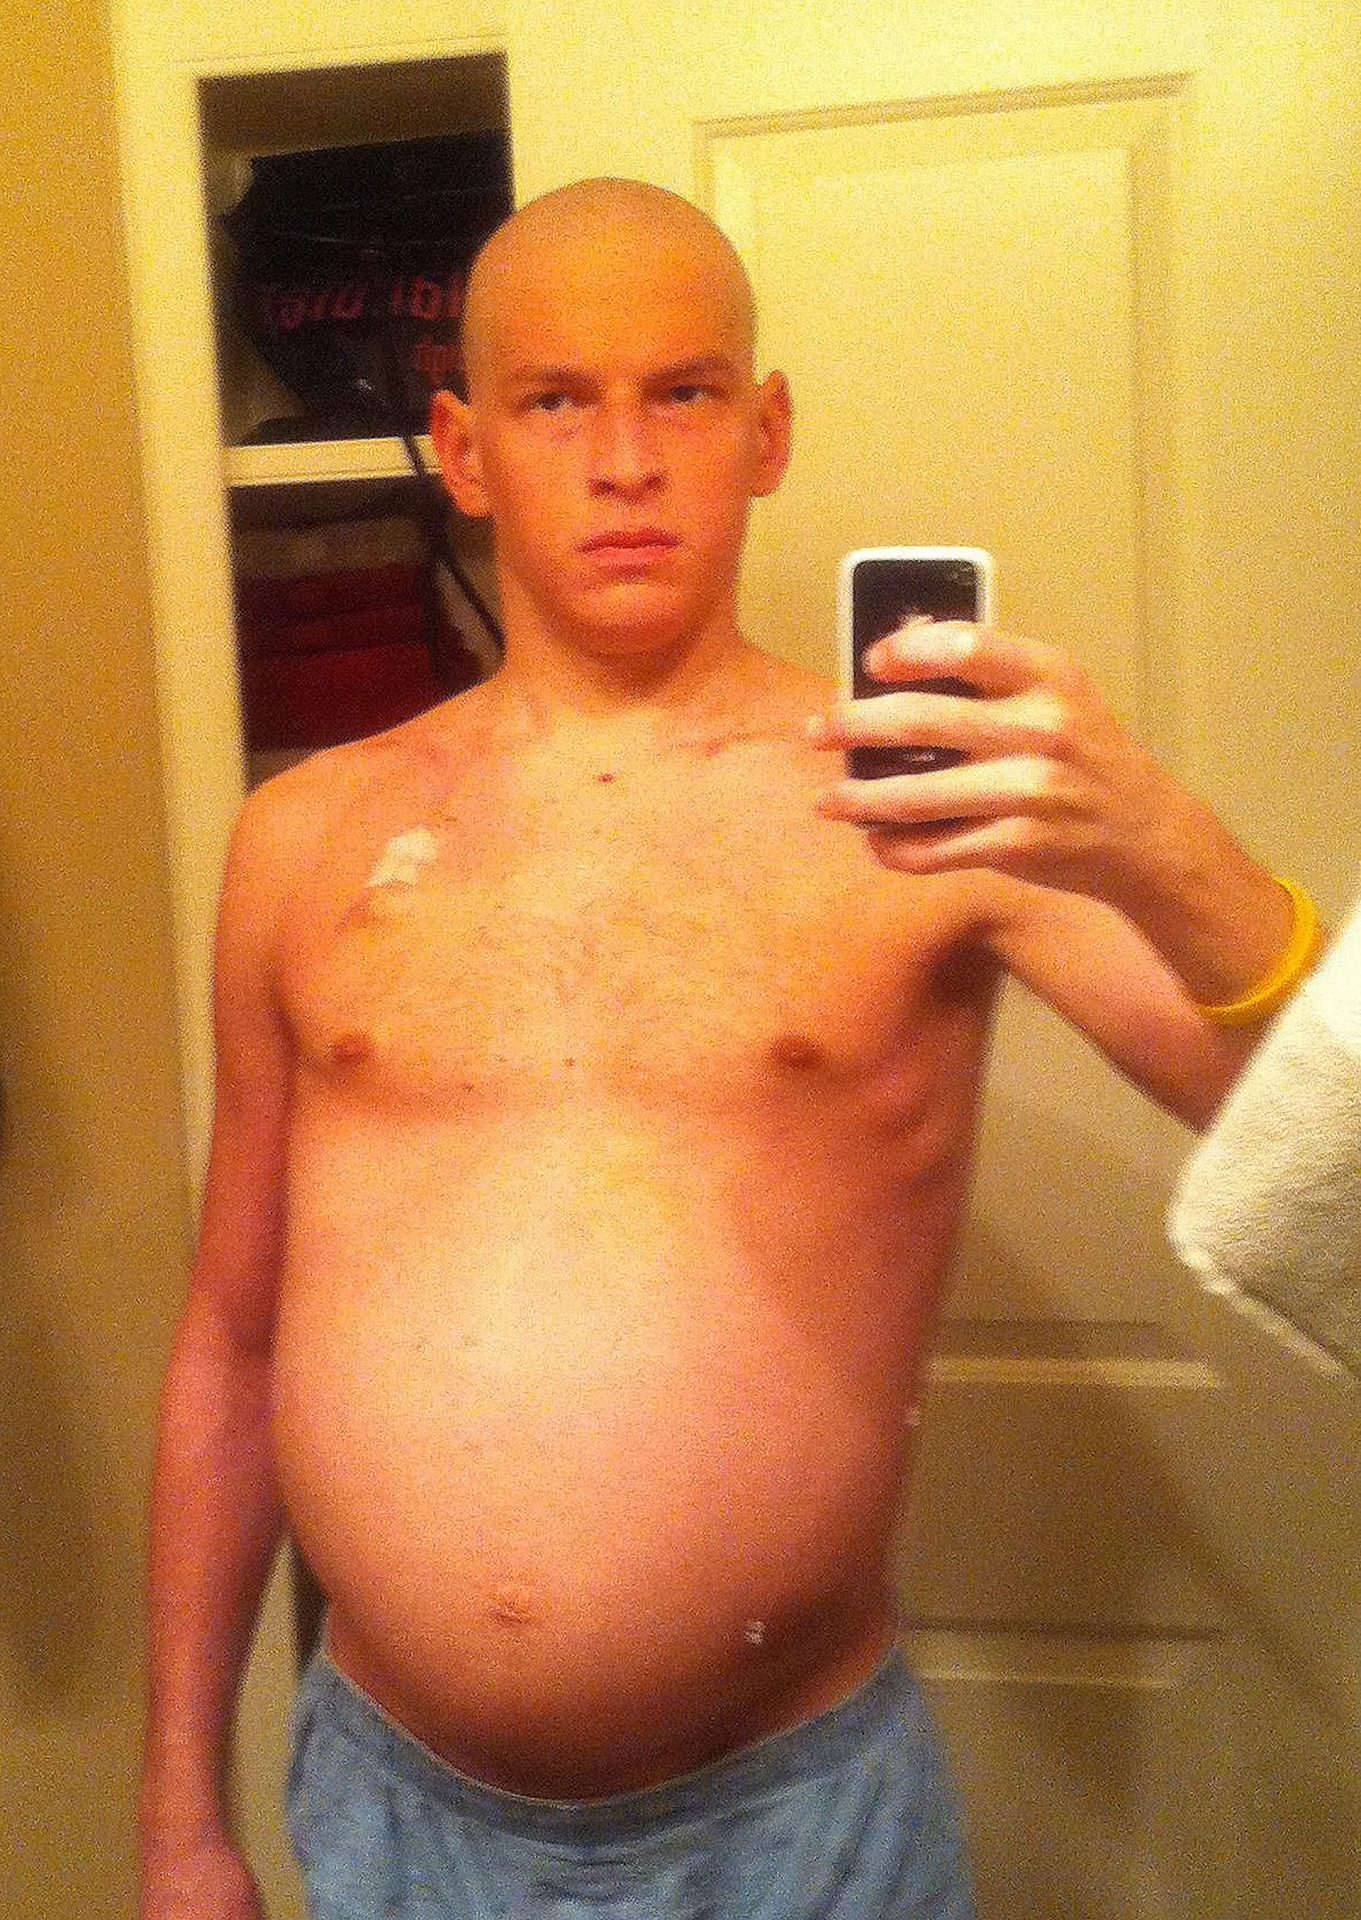 In this picture from 2011, David Fajgenbaum shows off his distended stomach, caused by the failure of his liver and kidneys.